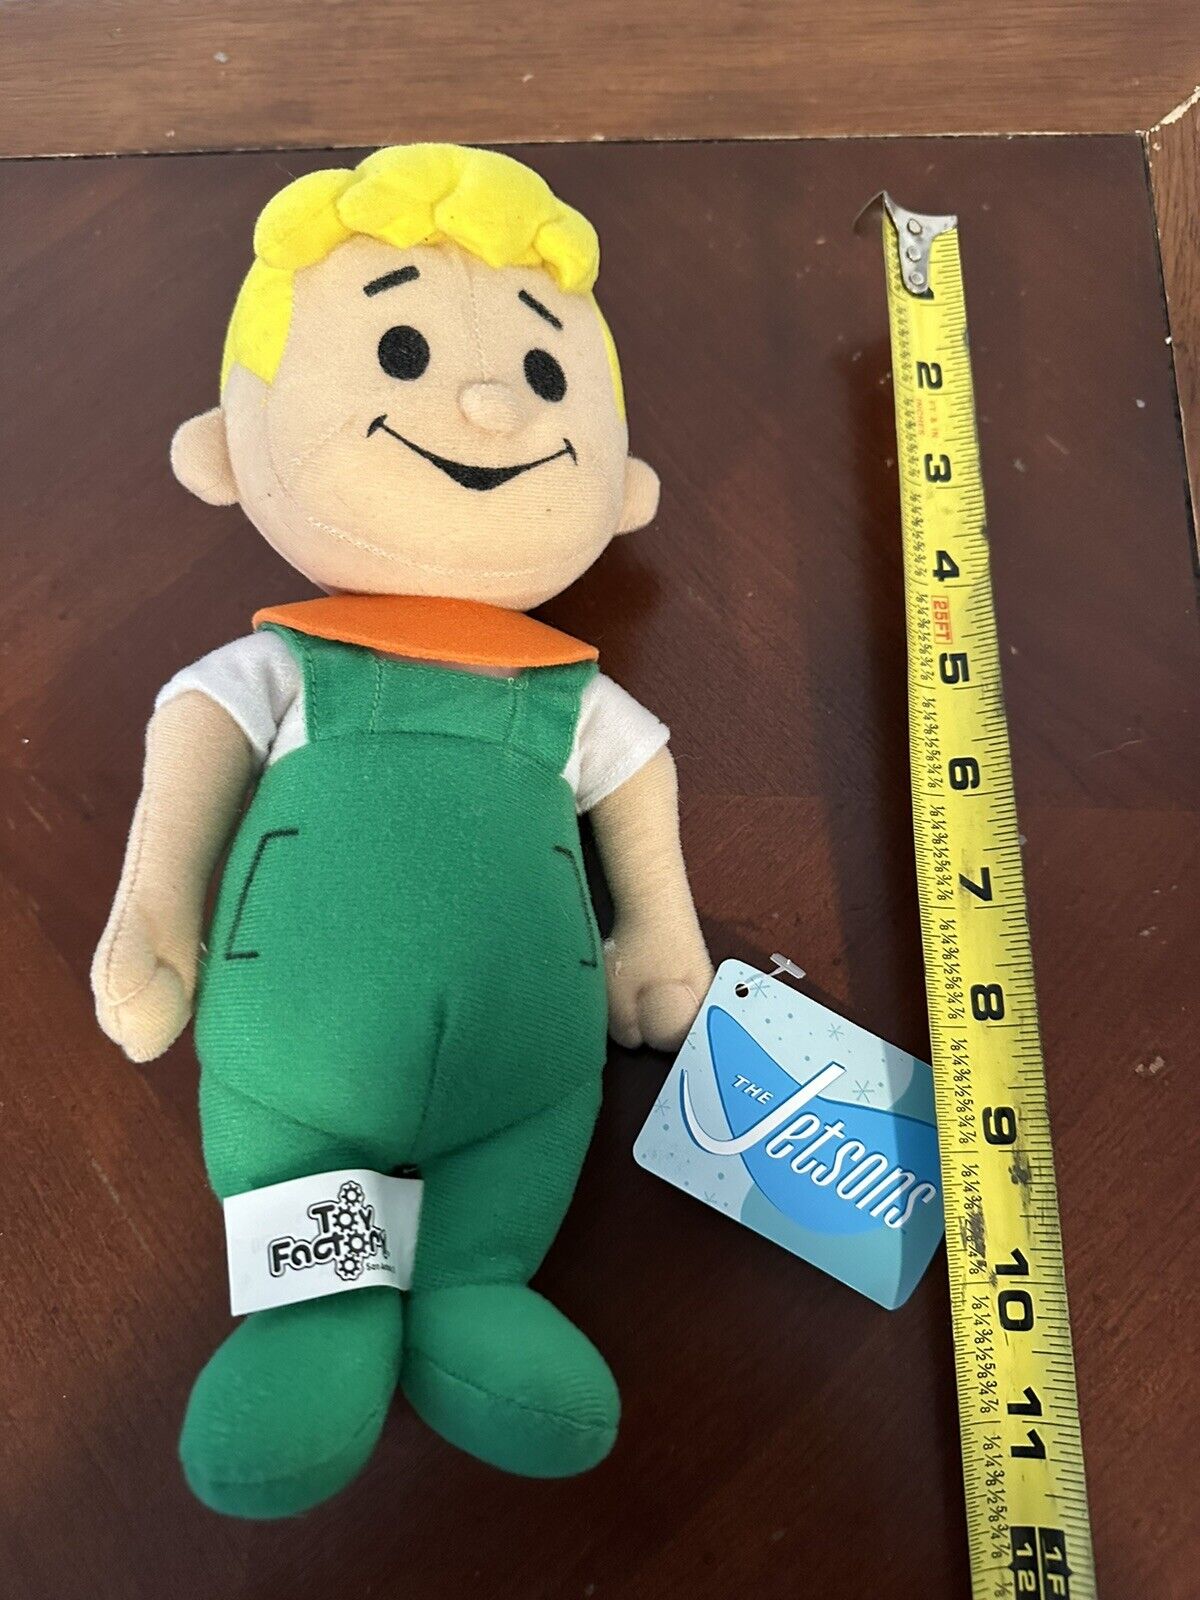 The Toy Factory Jetsons Stuffed Plush Elroy with Tags